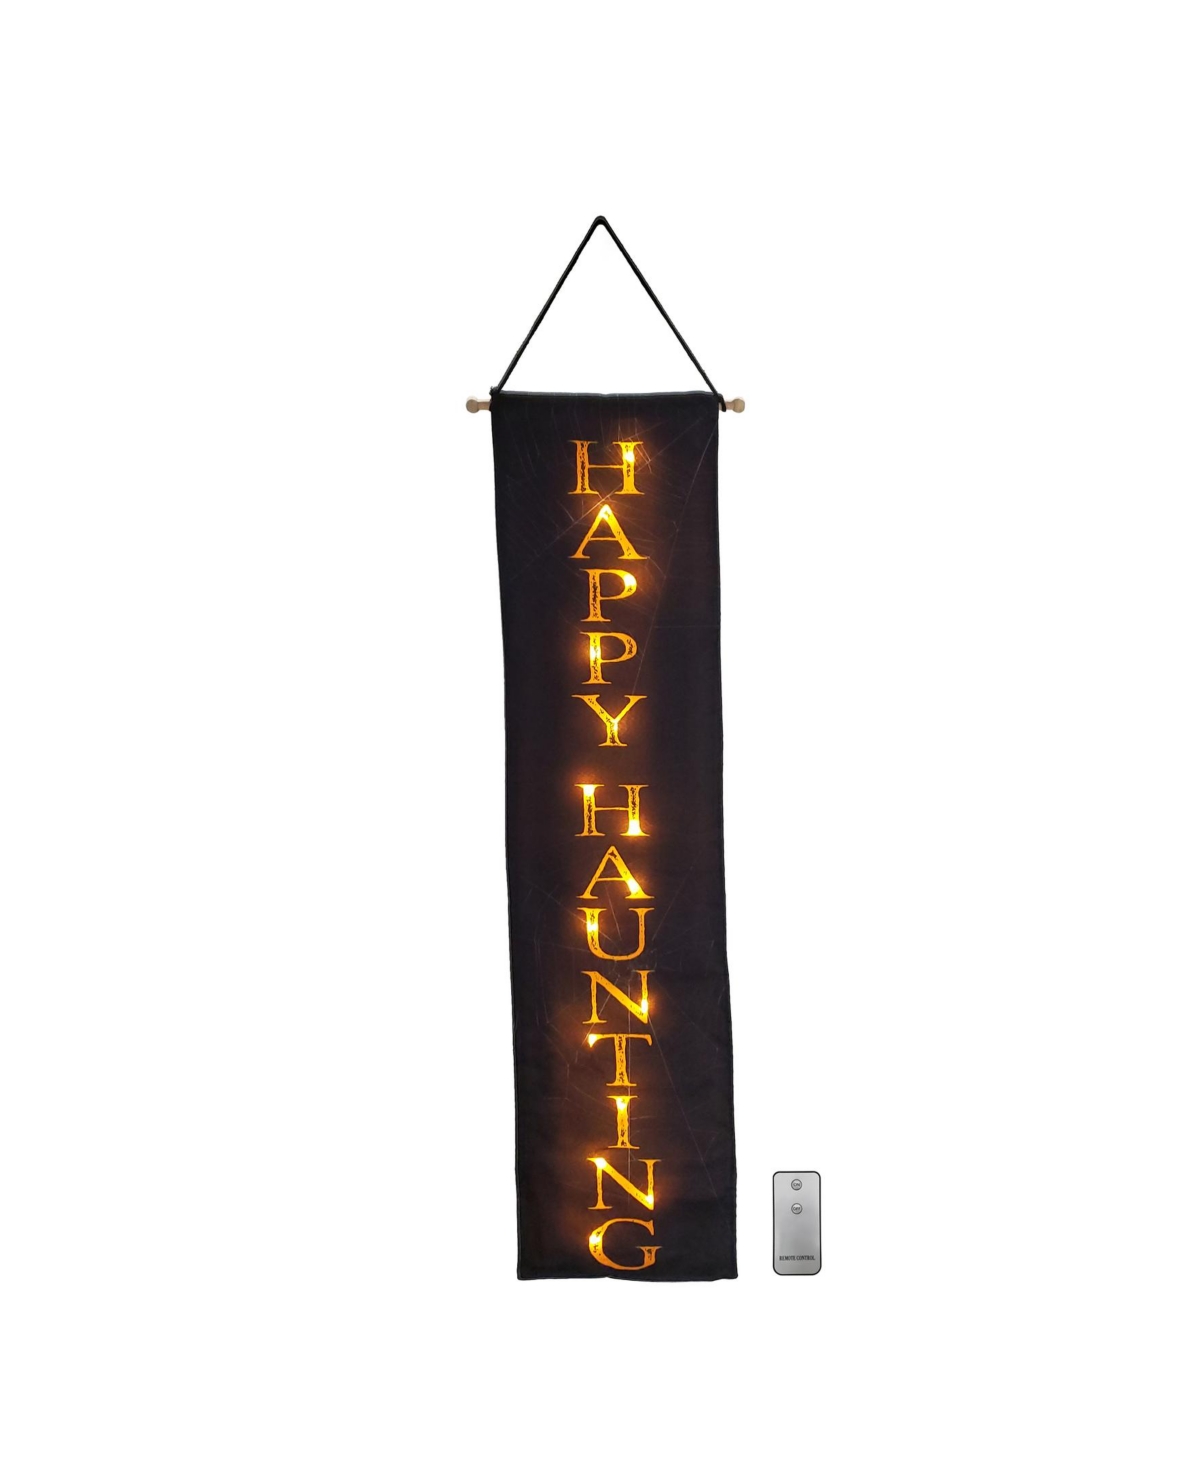 Lighted Happy Haunting Wall Banner with Remote Control - Black, Orange